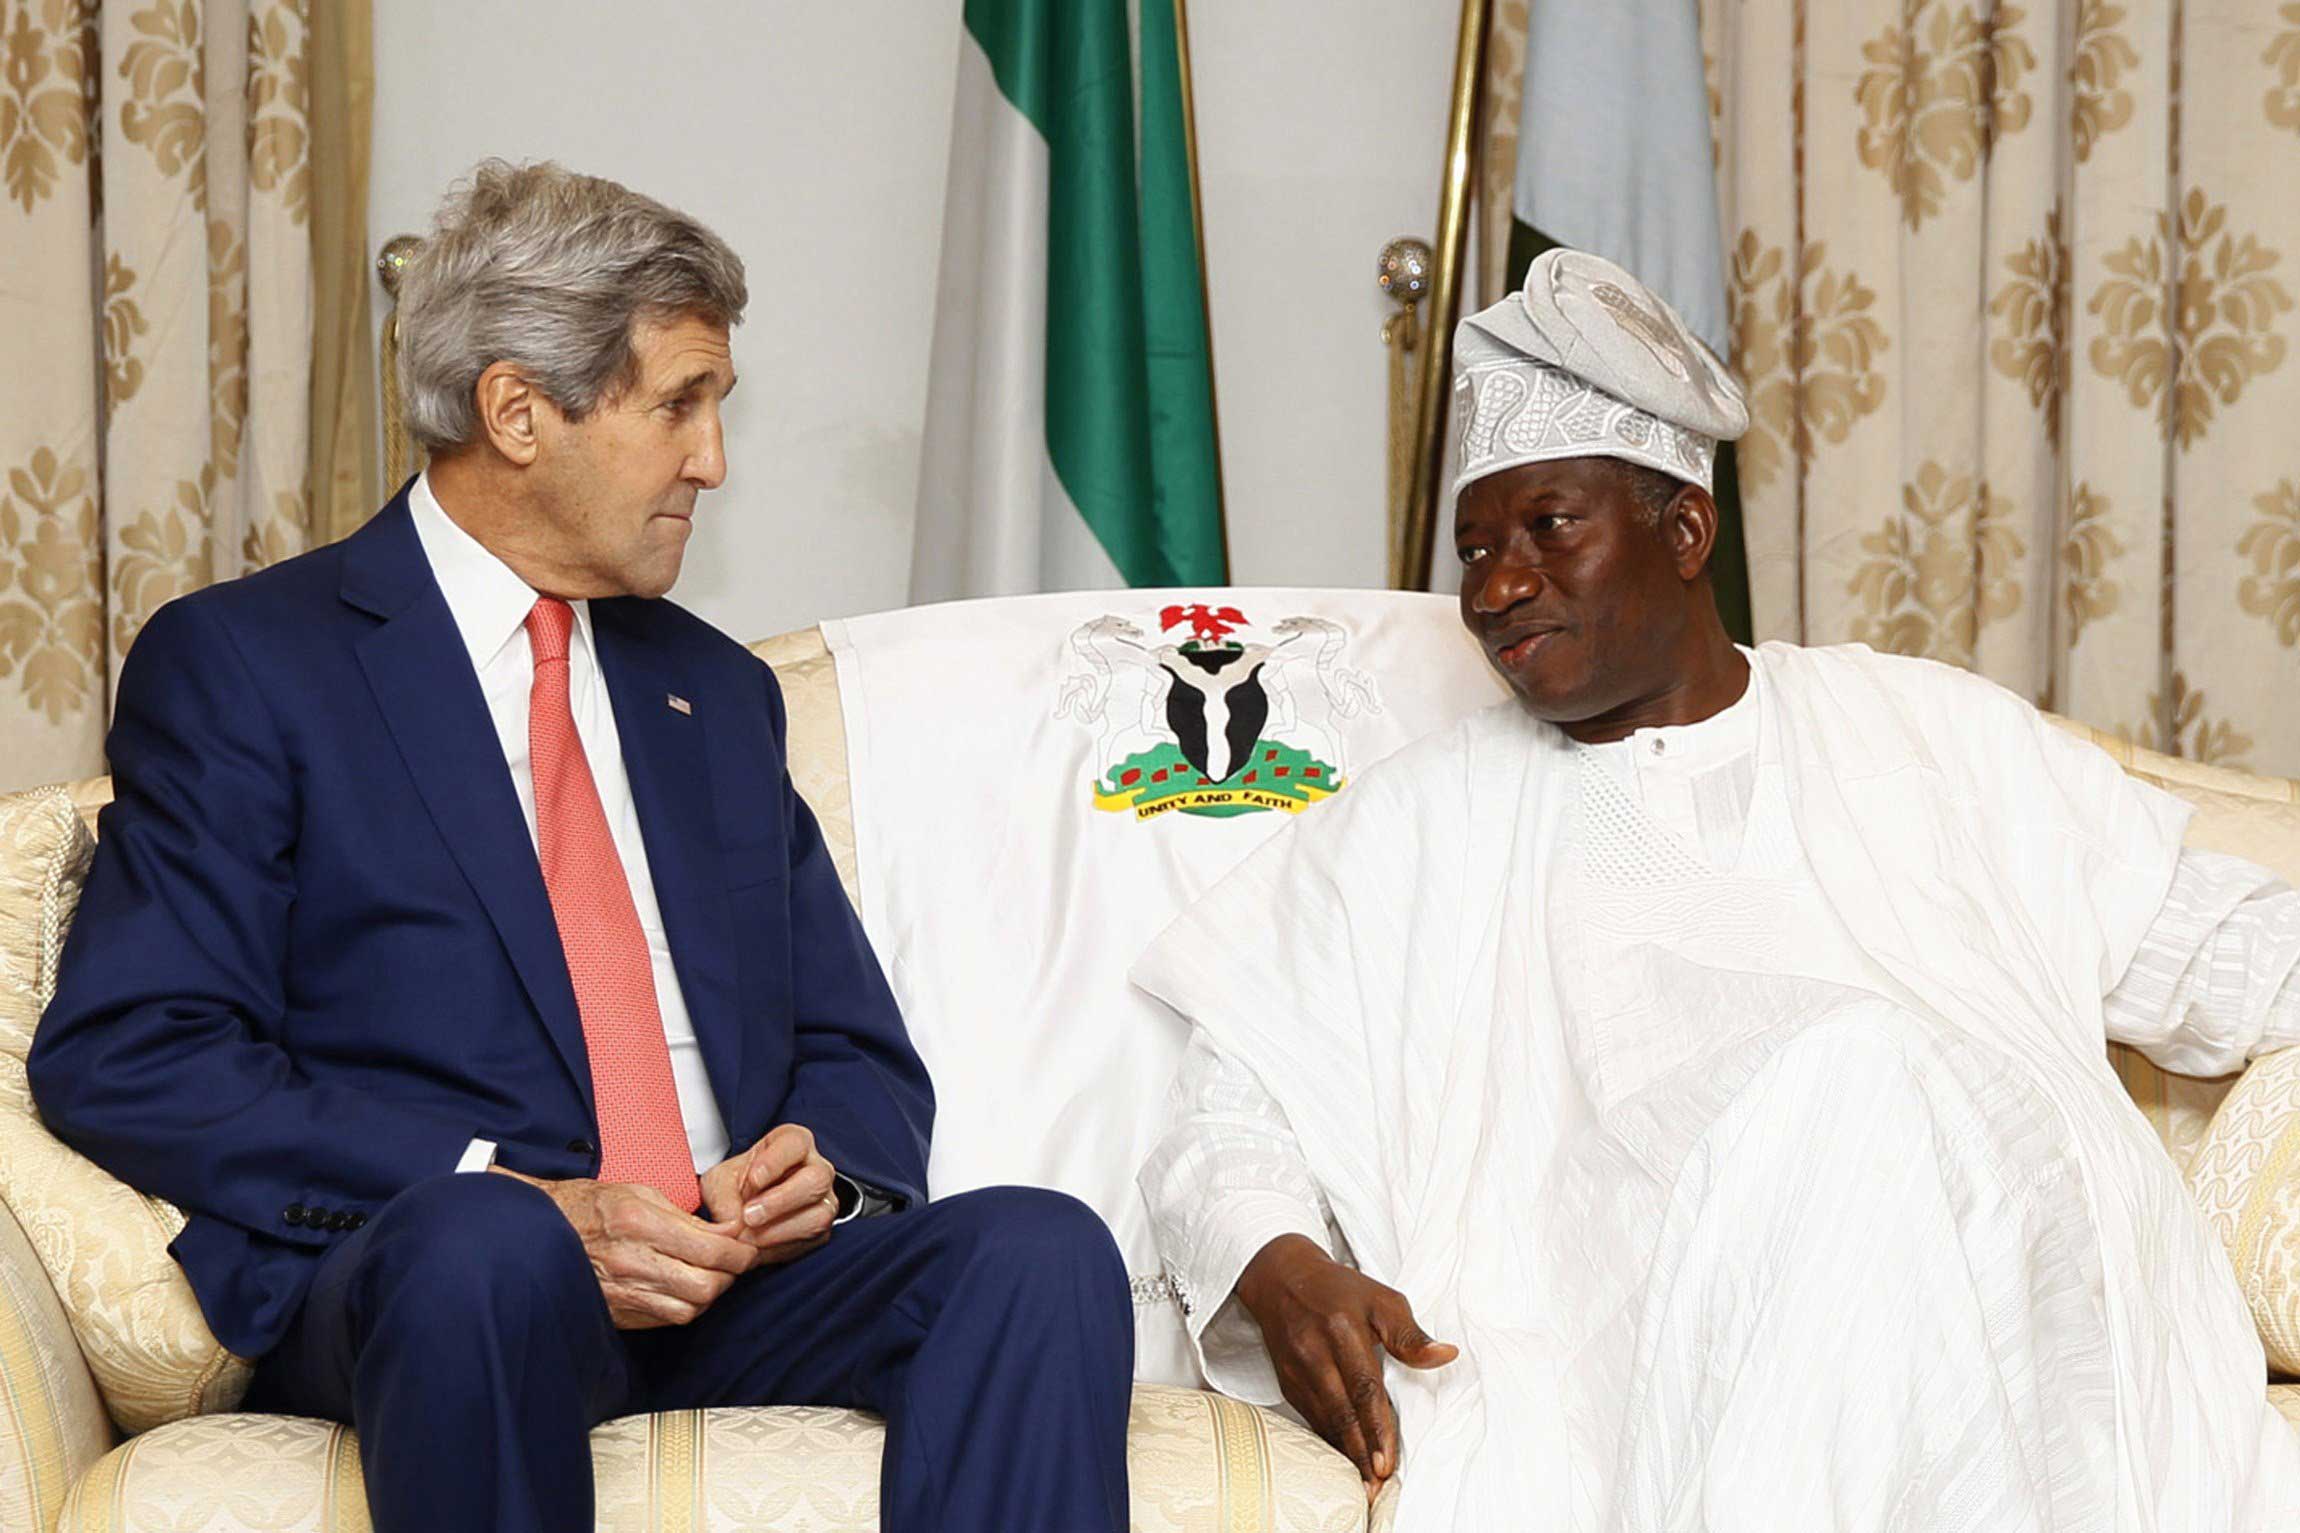 US Secretary of State John Kerry (L) meets with Nigeria's President Goodluck Jonathan to discuss peaceful elections at the State House in Lagos, Nigeria on Jan. 25, 2015.